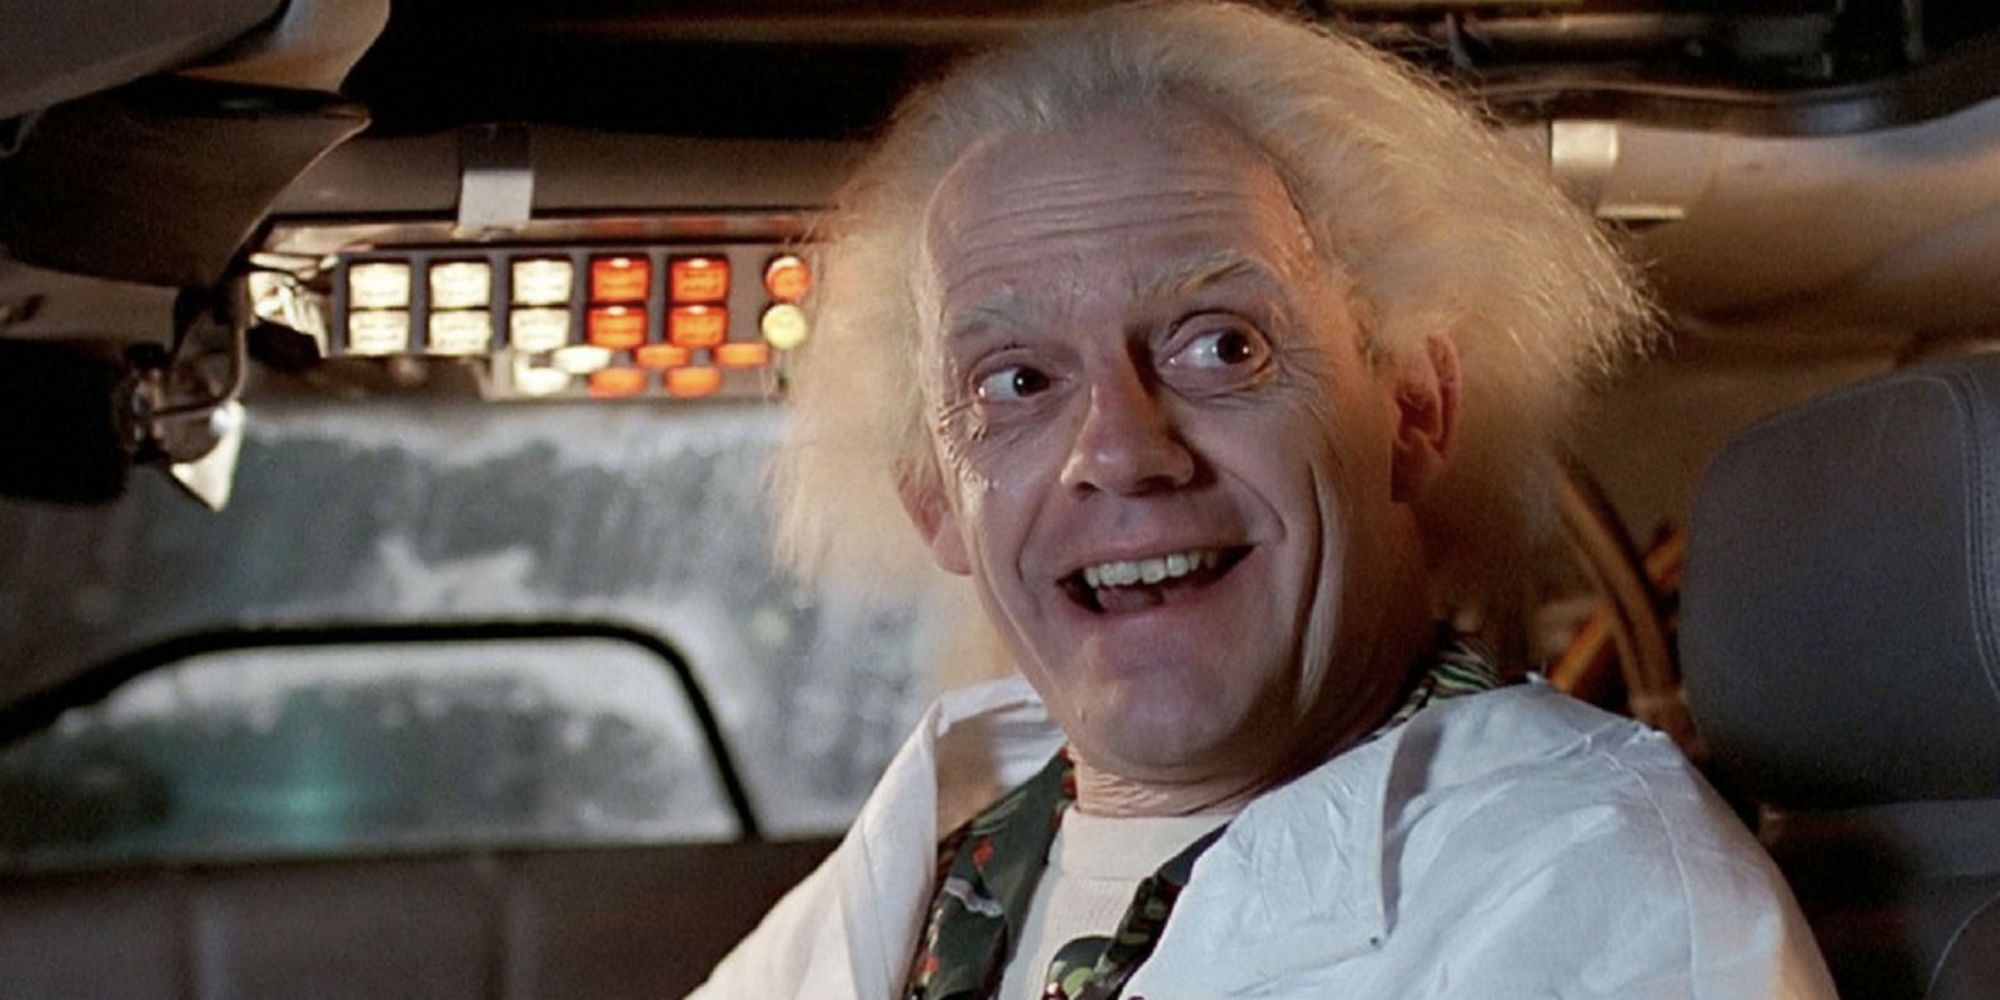 Christopher Lloyd as Doc Brown in Back to the Future